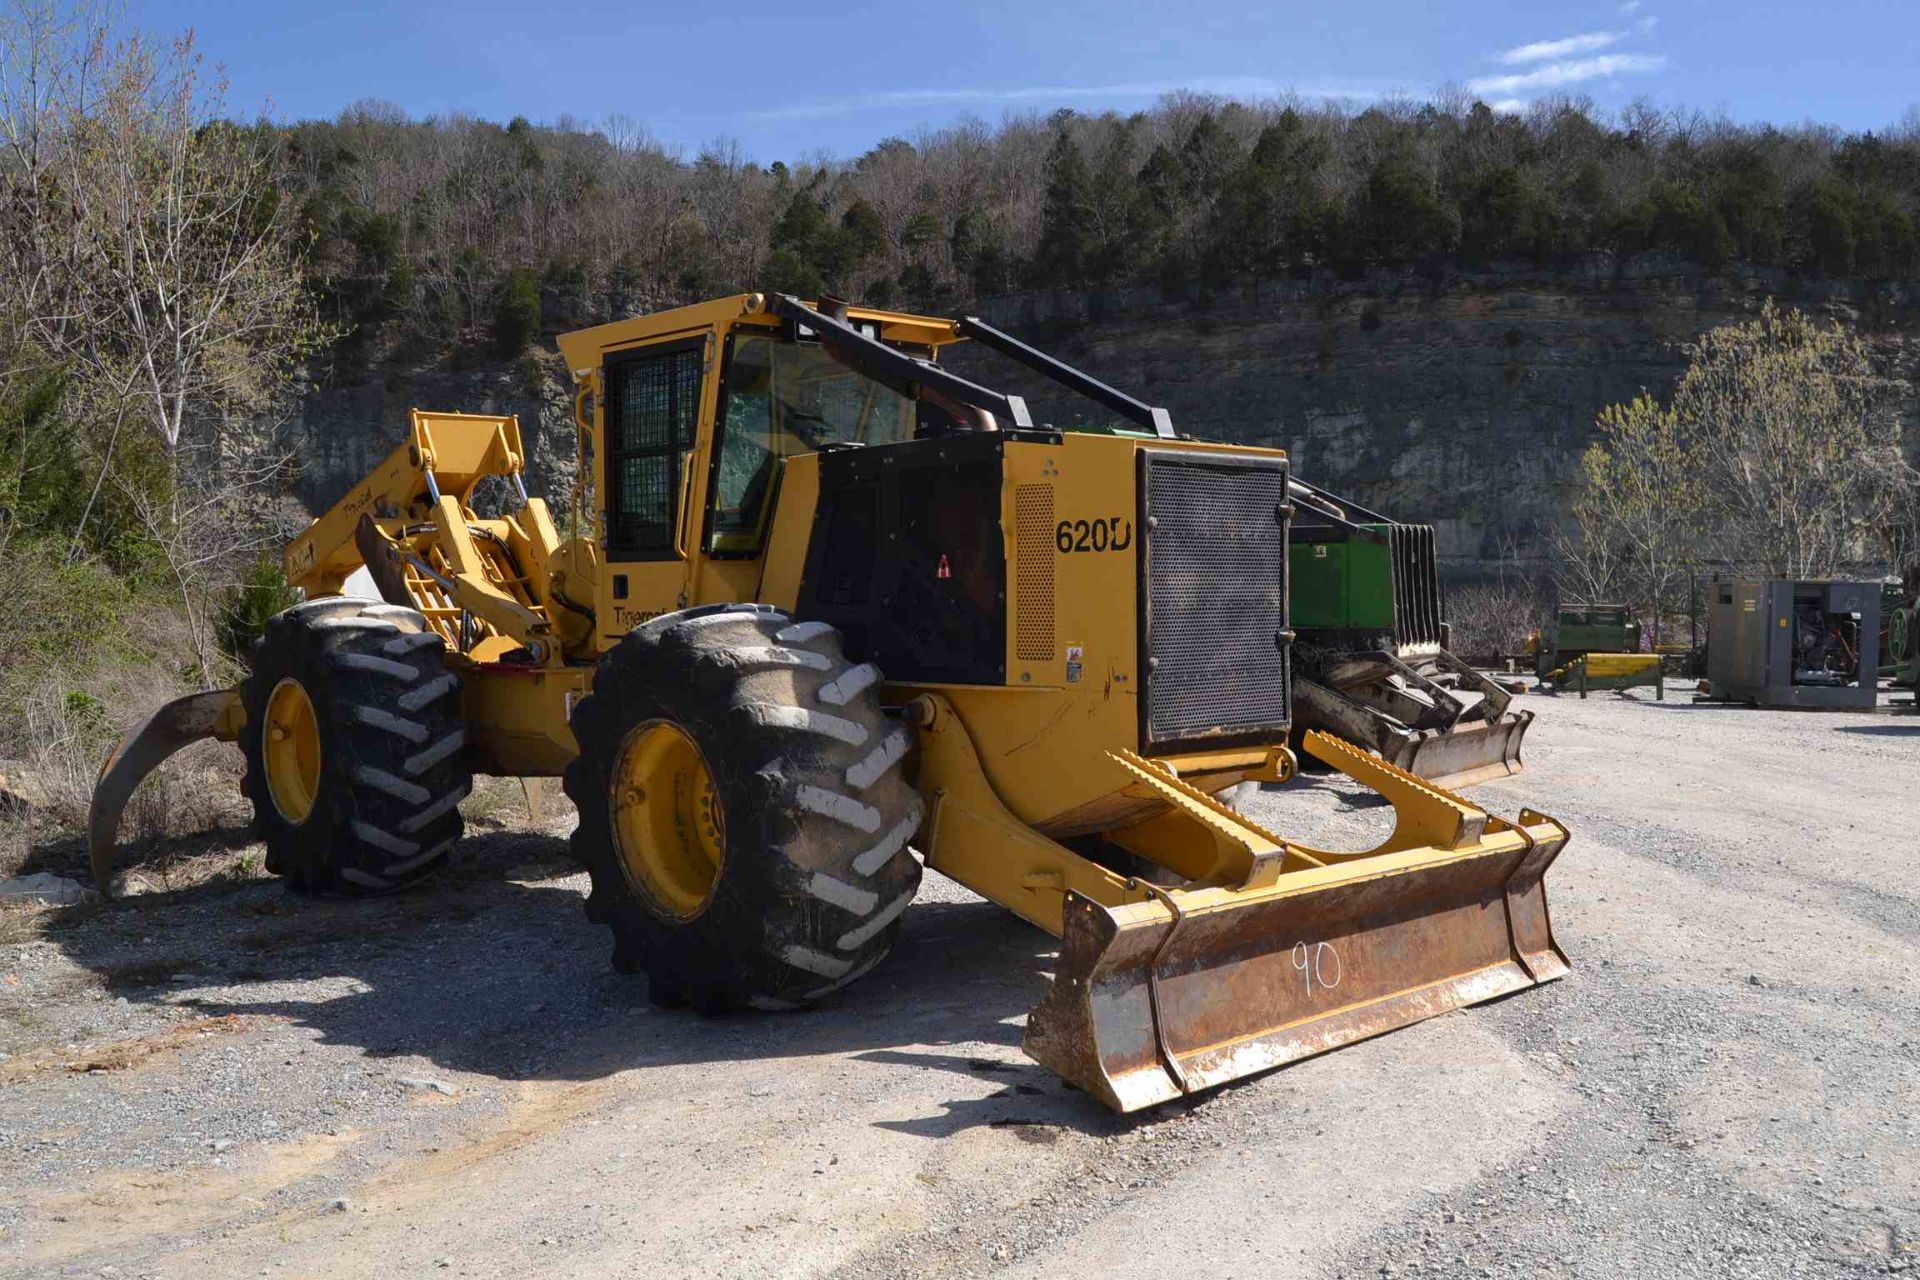 2013 TIGERCAT 620D DUAL ARCH GRAPPLE SKIDDER W/ENCLOSED CAB WITH HEAT & AIR; W/30.5X32 RUBBER; S/N-